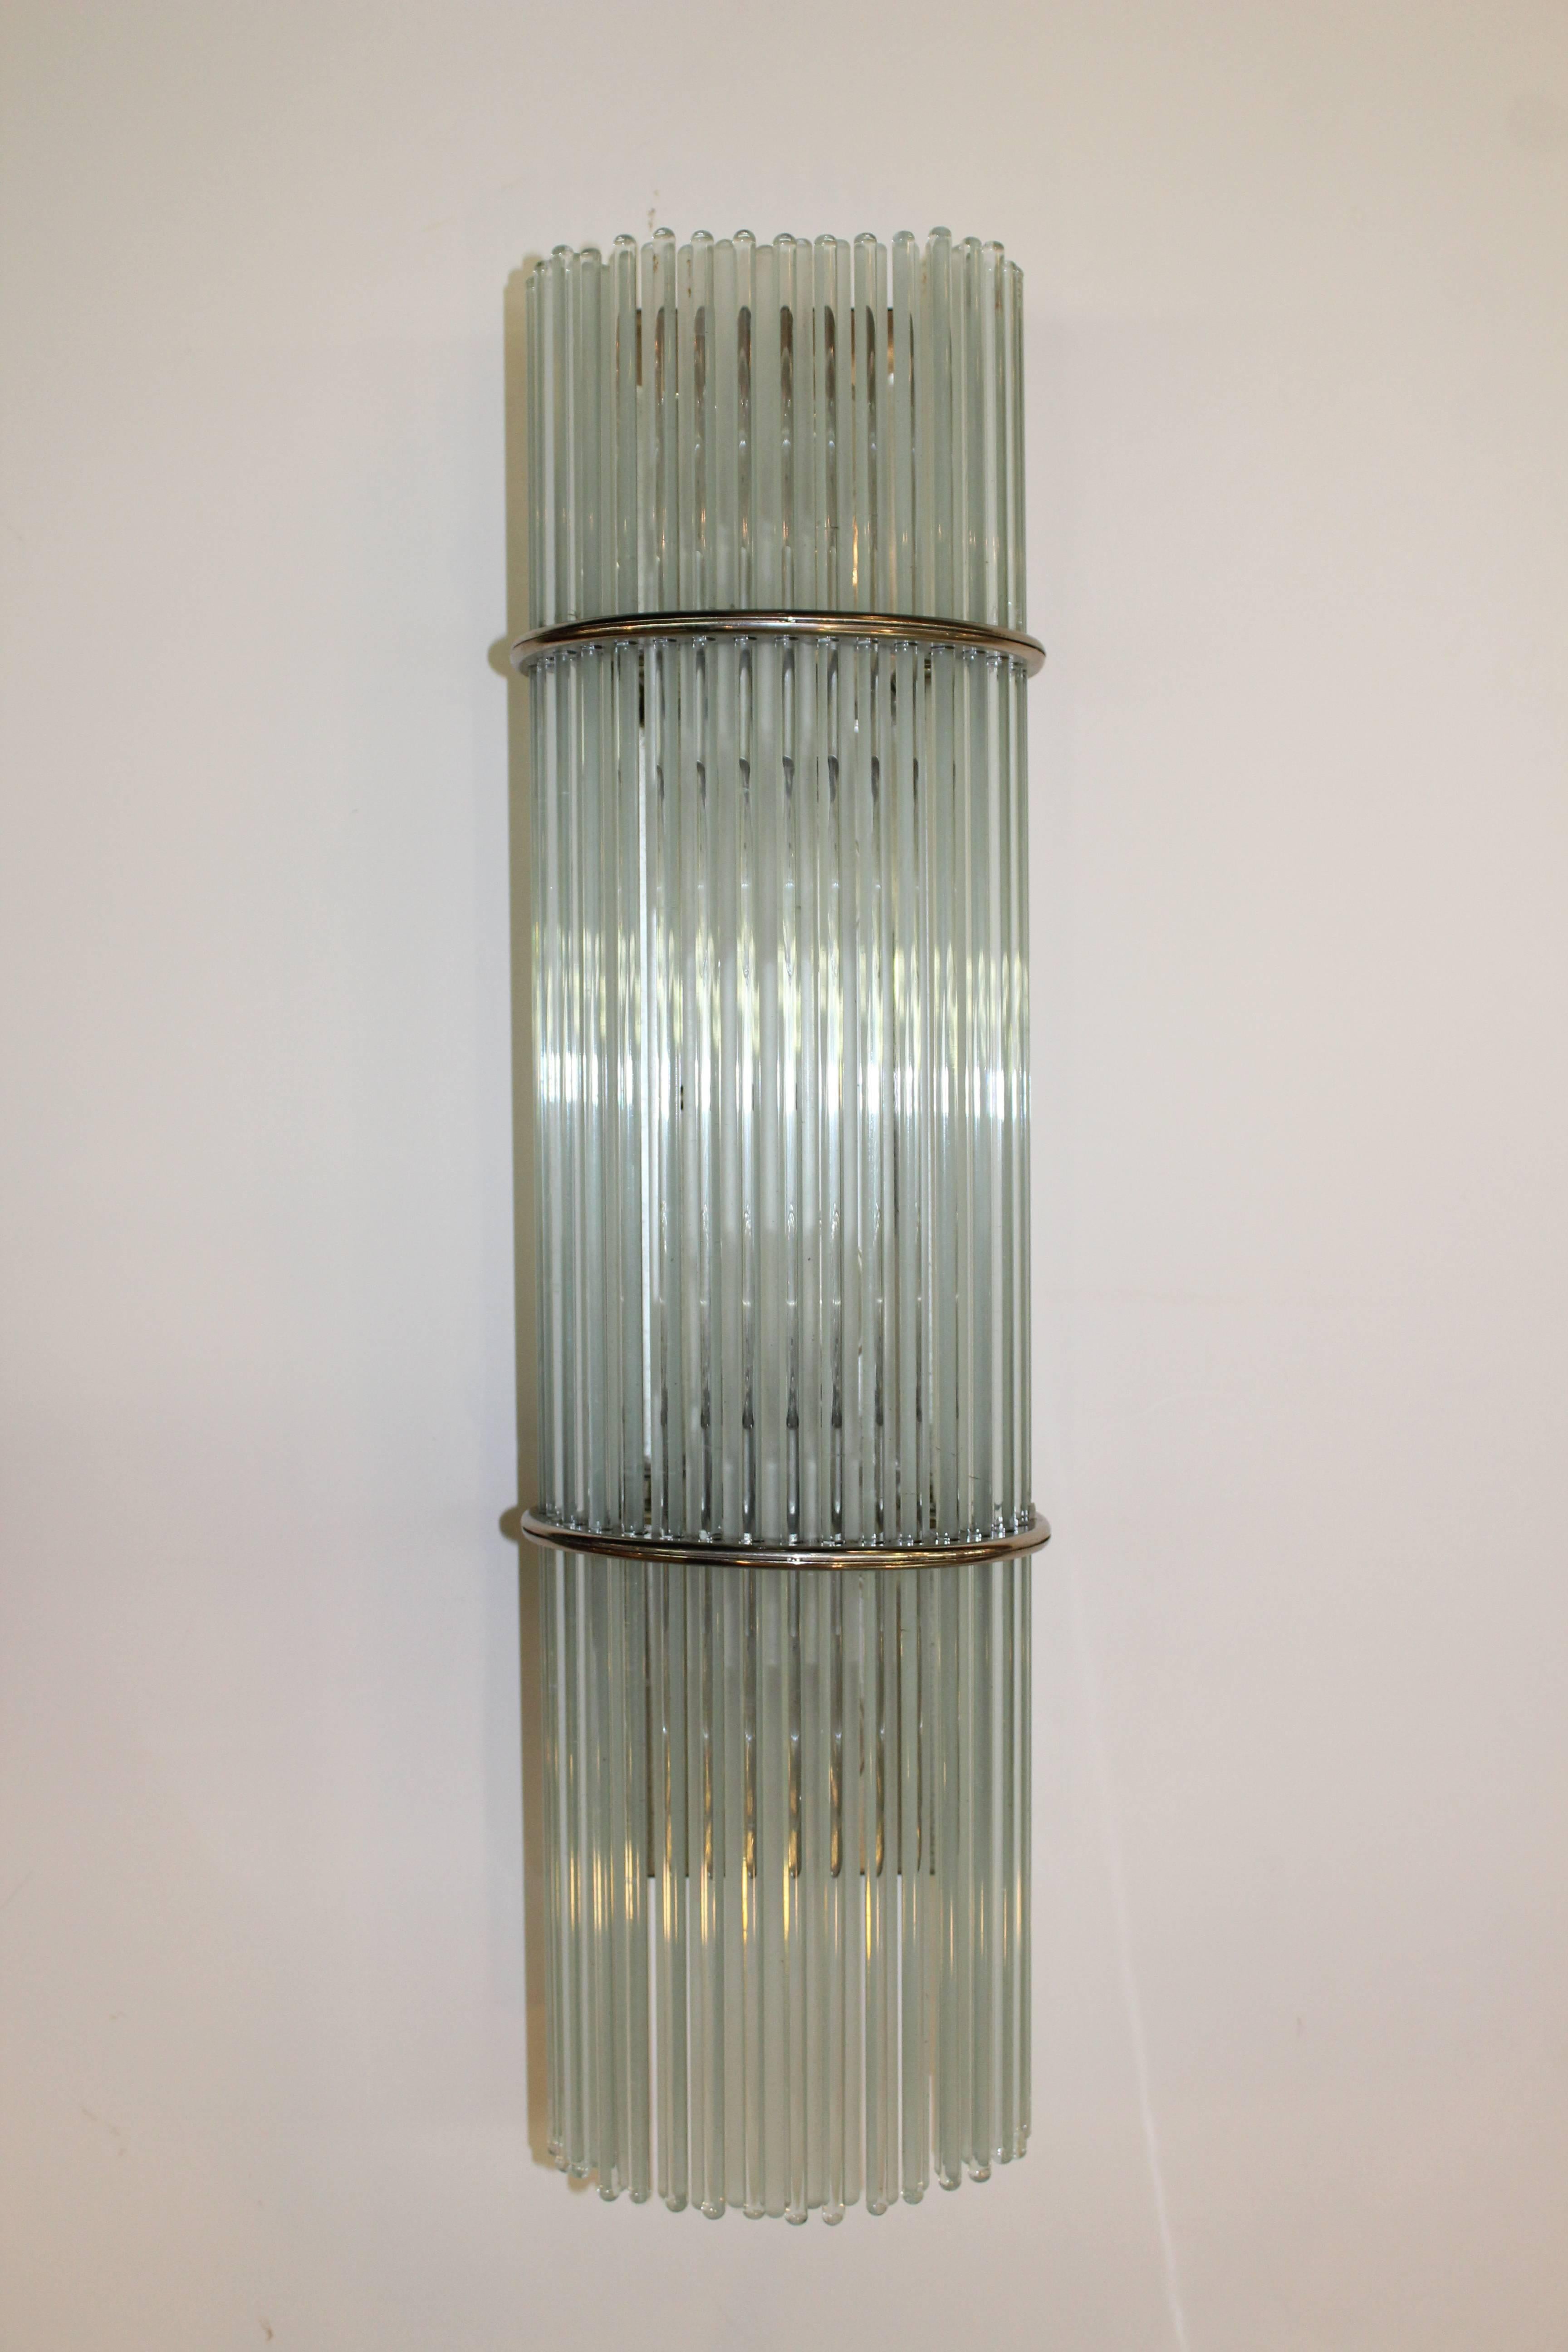 A pair of Italian Mid-century Modern glass sconces by Gaetano Sciolari. Crafted using many small rods of glass supported by nickel-plated backs. 
110634
  